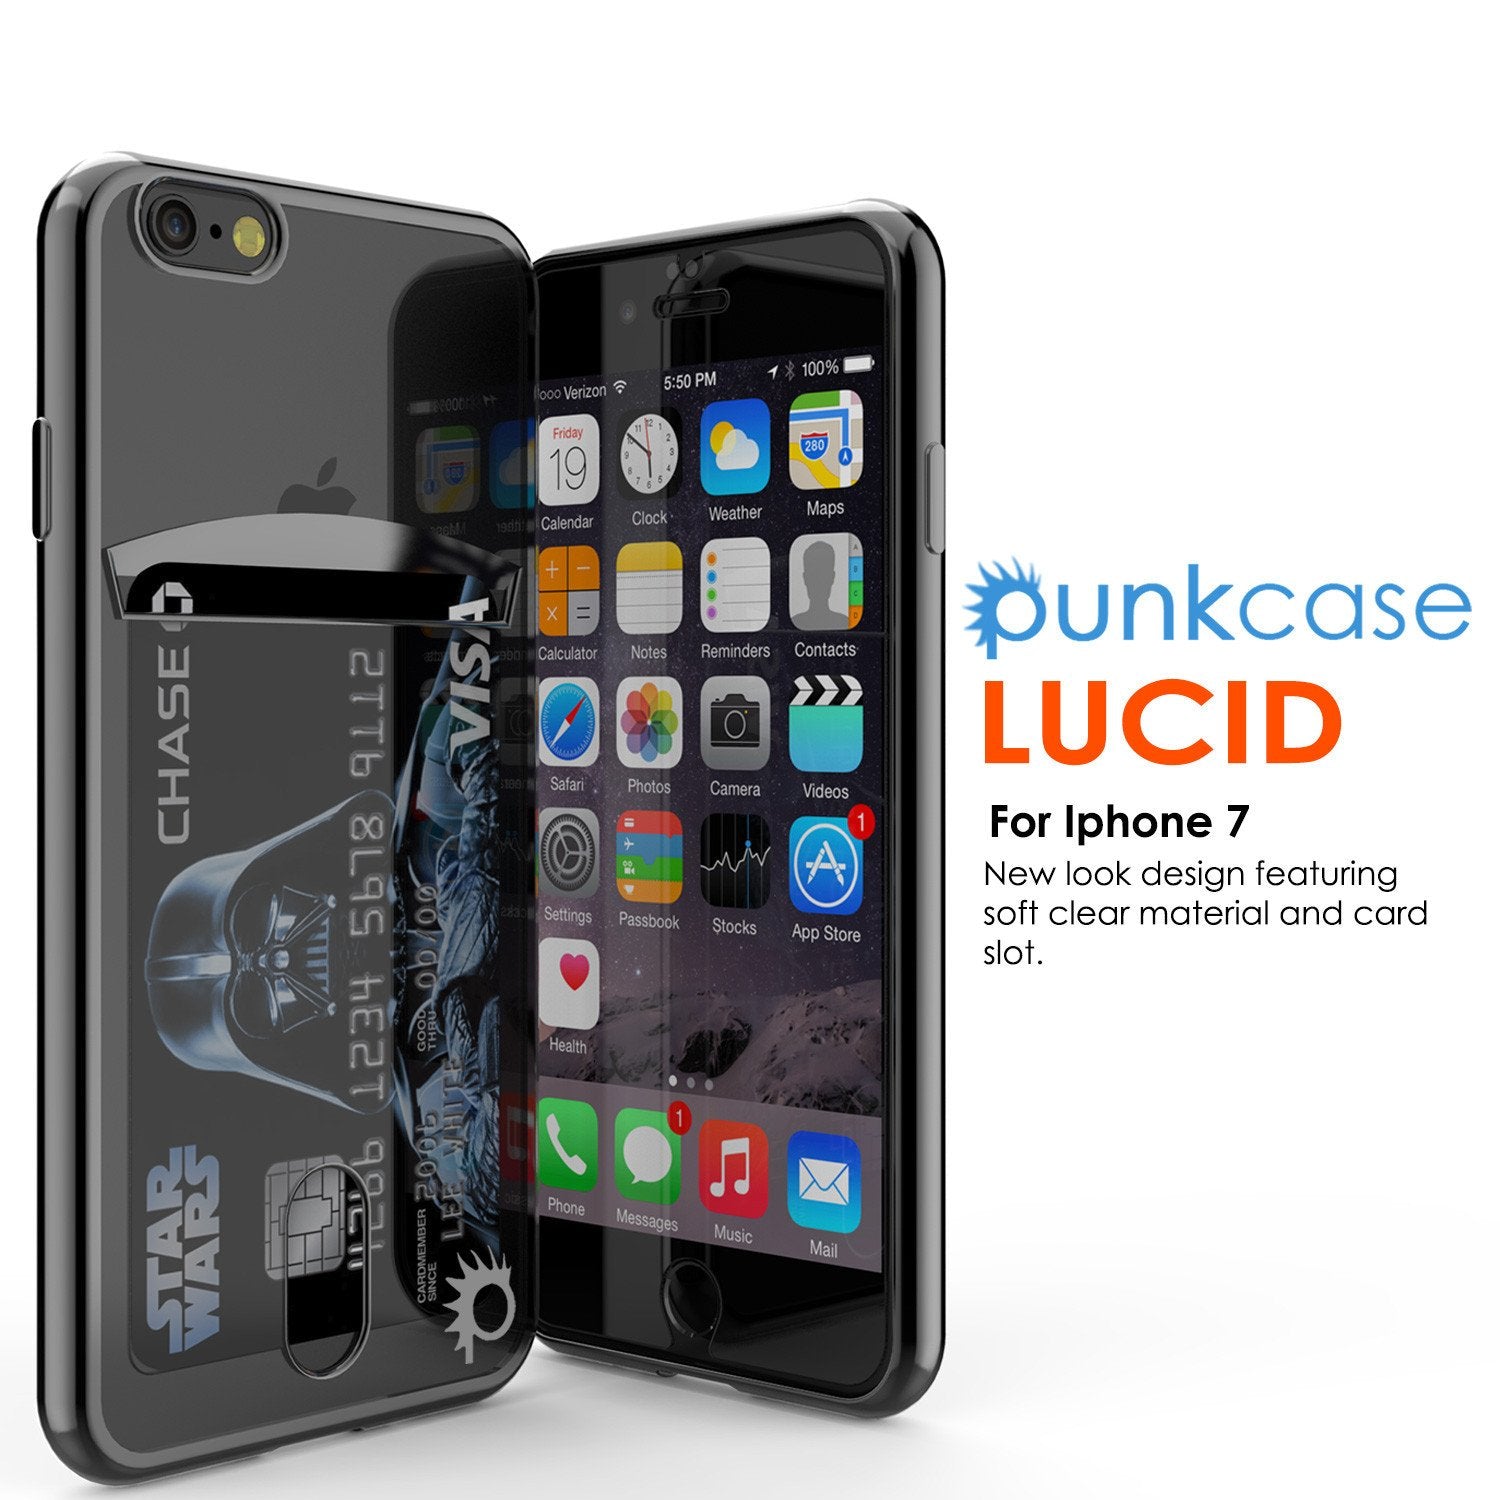 iPhone 7 Case, PUNKCASE® LUCID Black Series for iPhone 7 Premium Impact Protective Armor Case Cover | Clear TPU | Lifetime Warranty Exchange | PUNK SHIELD Screen Protector | Ultra Fit